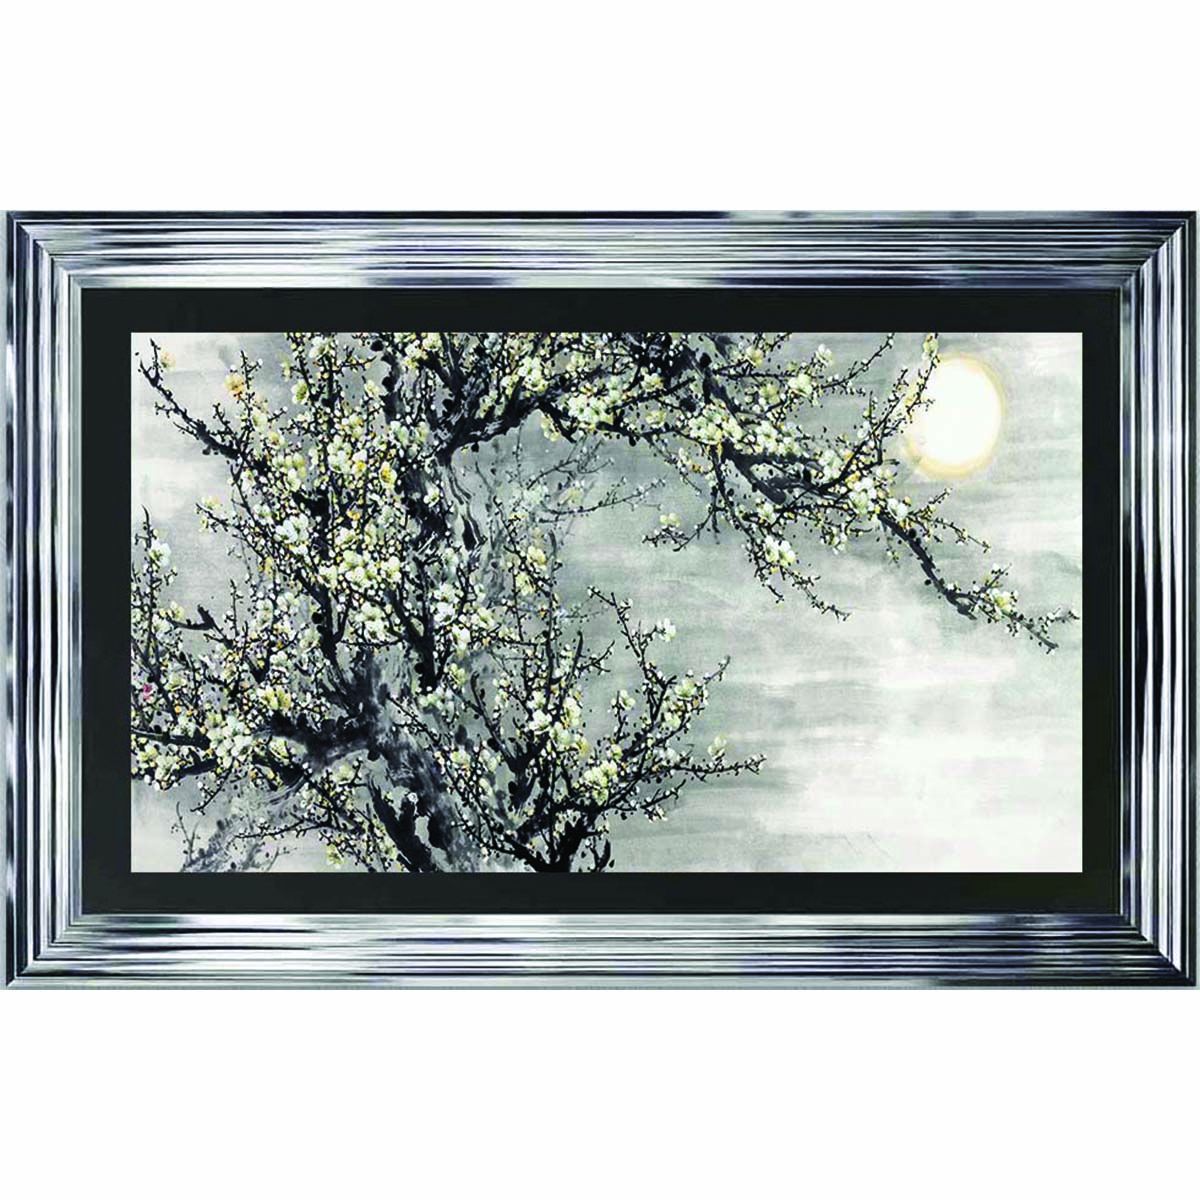 Blossom Framed Liquid Art Work | Painting 3d Embellished Of Blossom Tree With Regard To Liquid Wall Art (View 3 of 15)